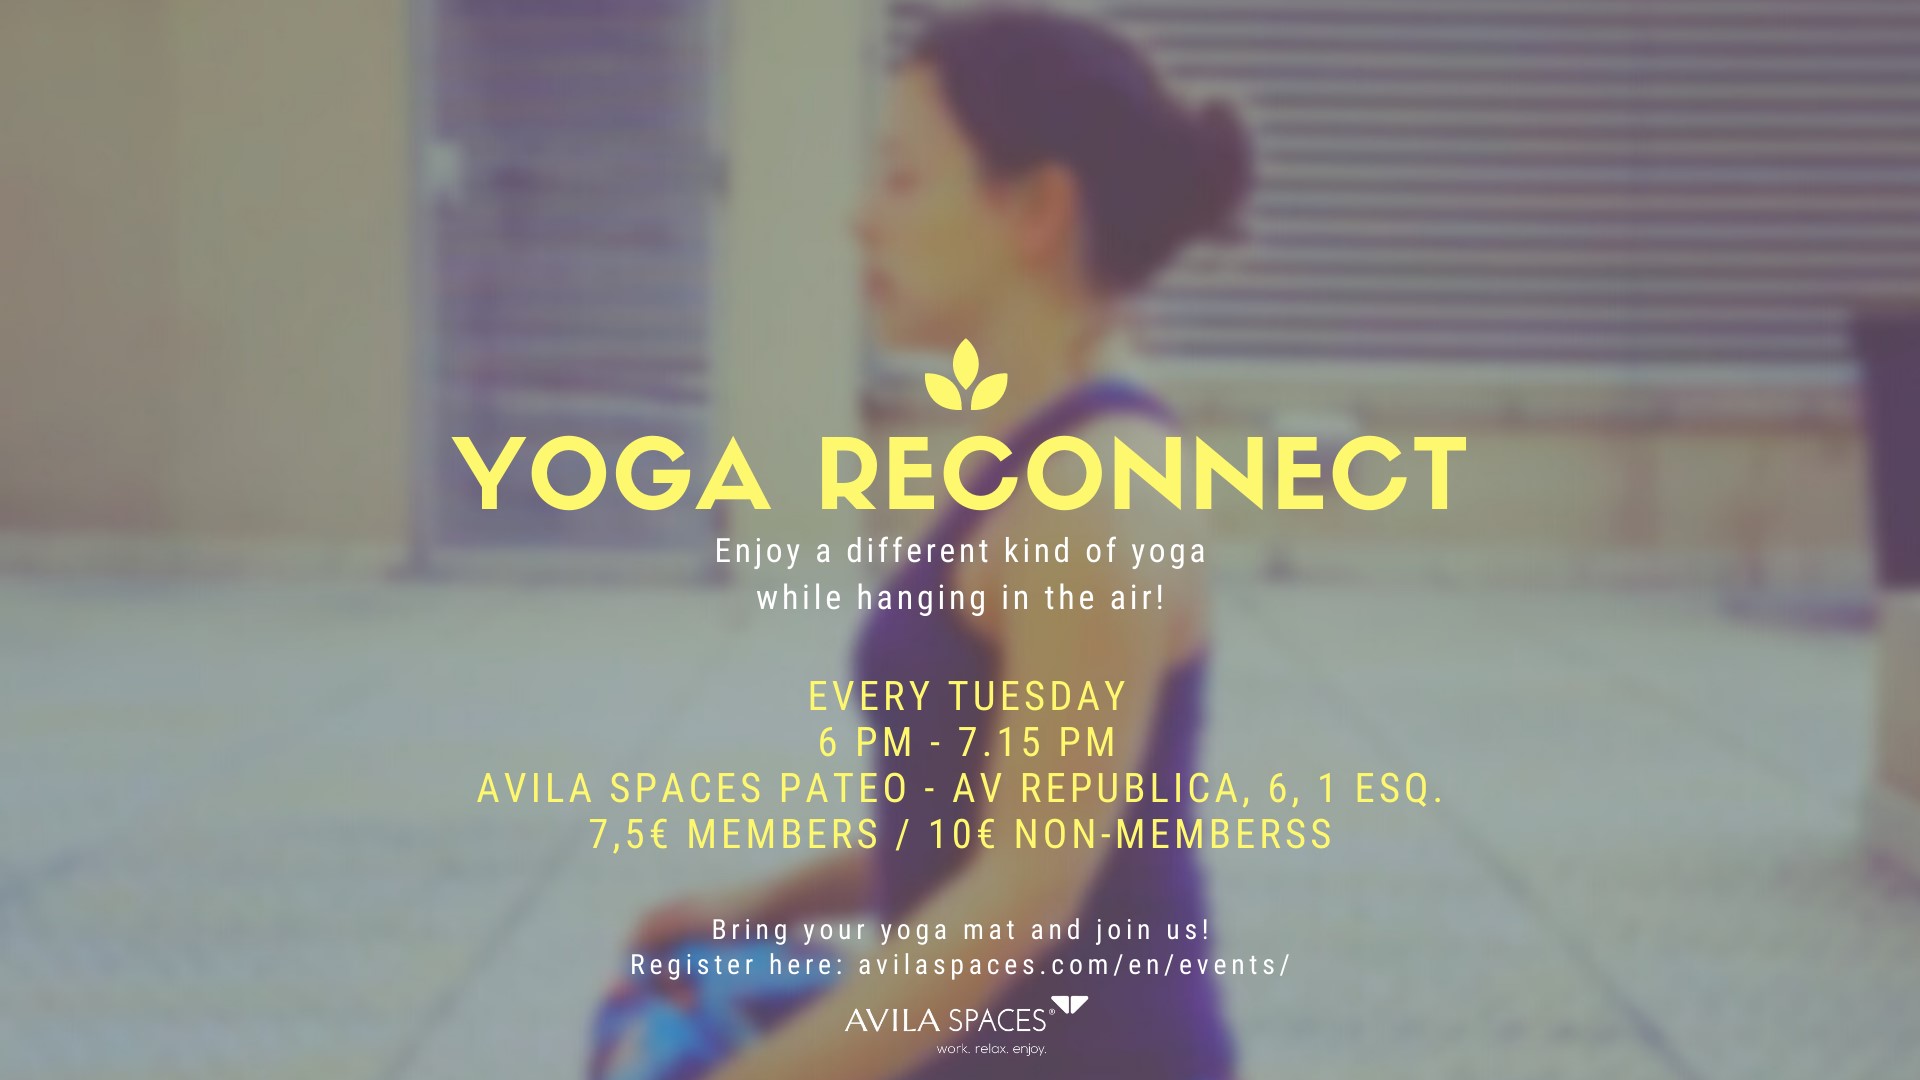 Let´s Reconnect with Yoga in the Pateo